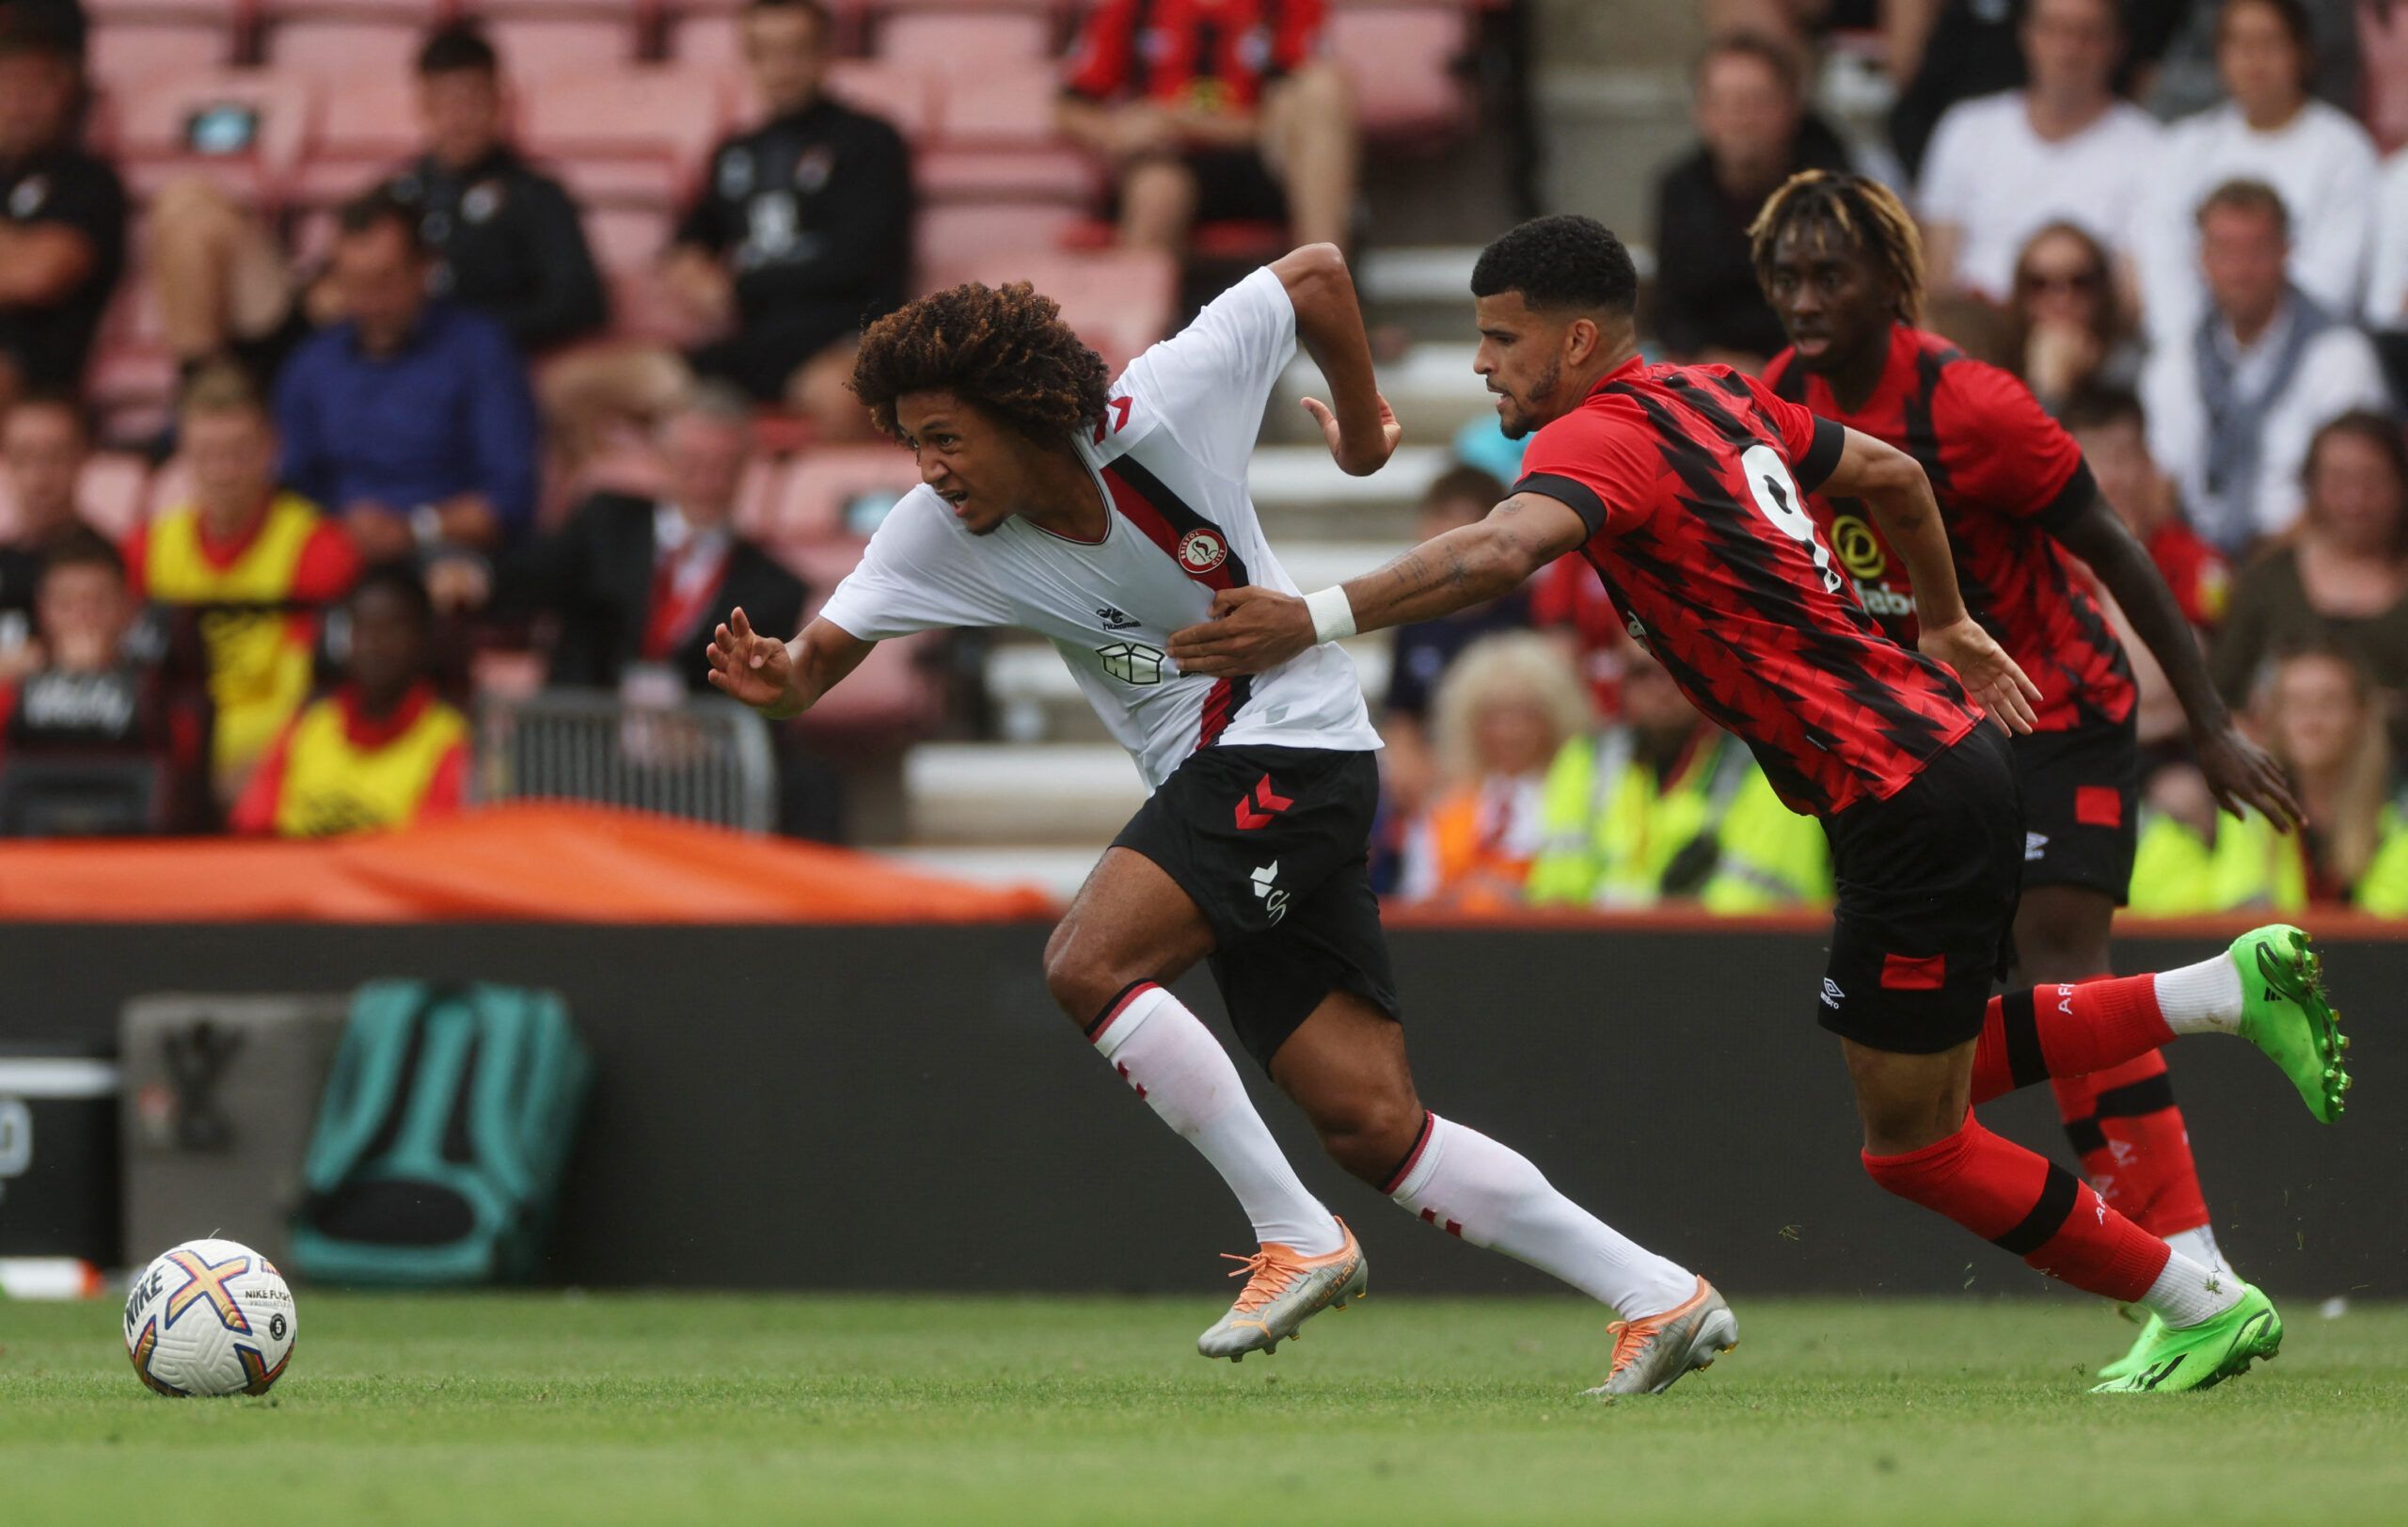 Soccer Football - Pre Season Friendly - AFC Bournemouth v Bristol City - Vitality Stadium, Bournemouth, Britain - July 23, 2022 AFC Bournemouth's Dominic Solanke in action with Bristol City's Han-Noah Massengo Action Images via Reuters/Paul Childs